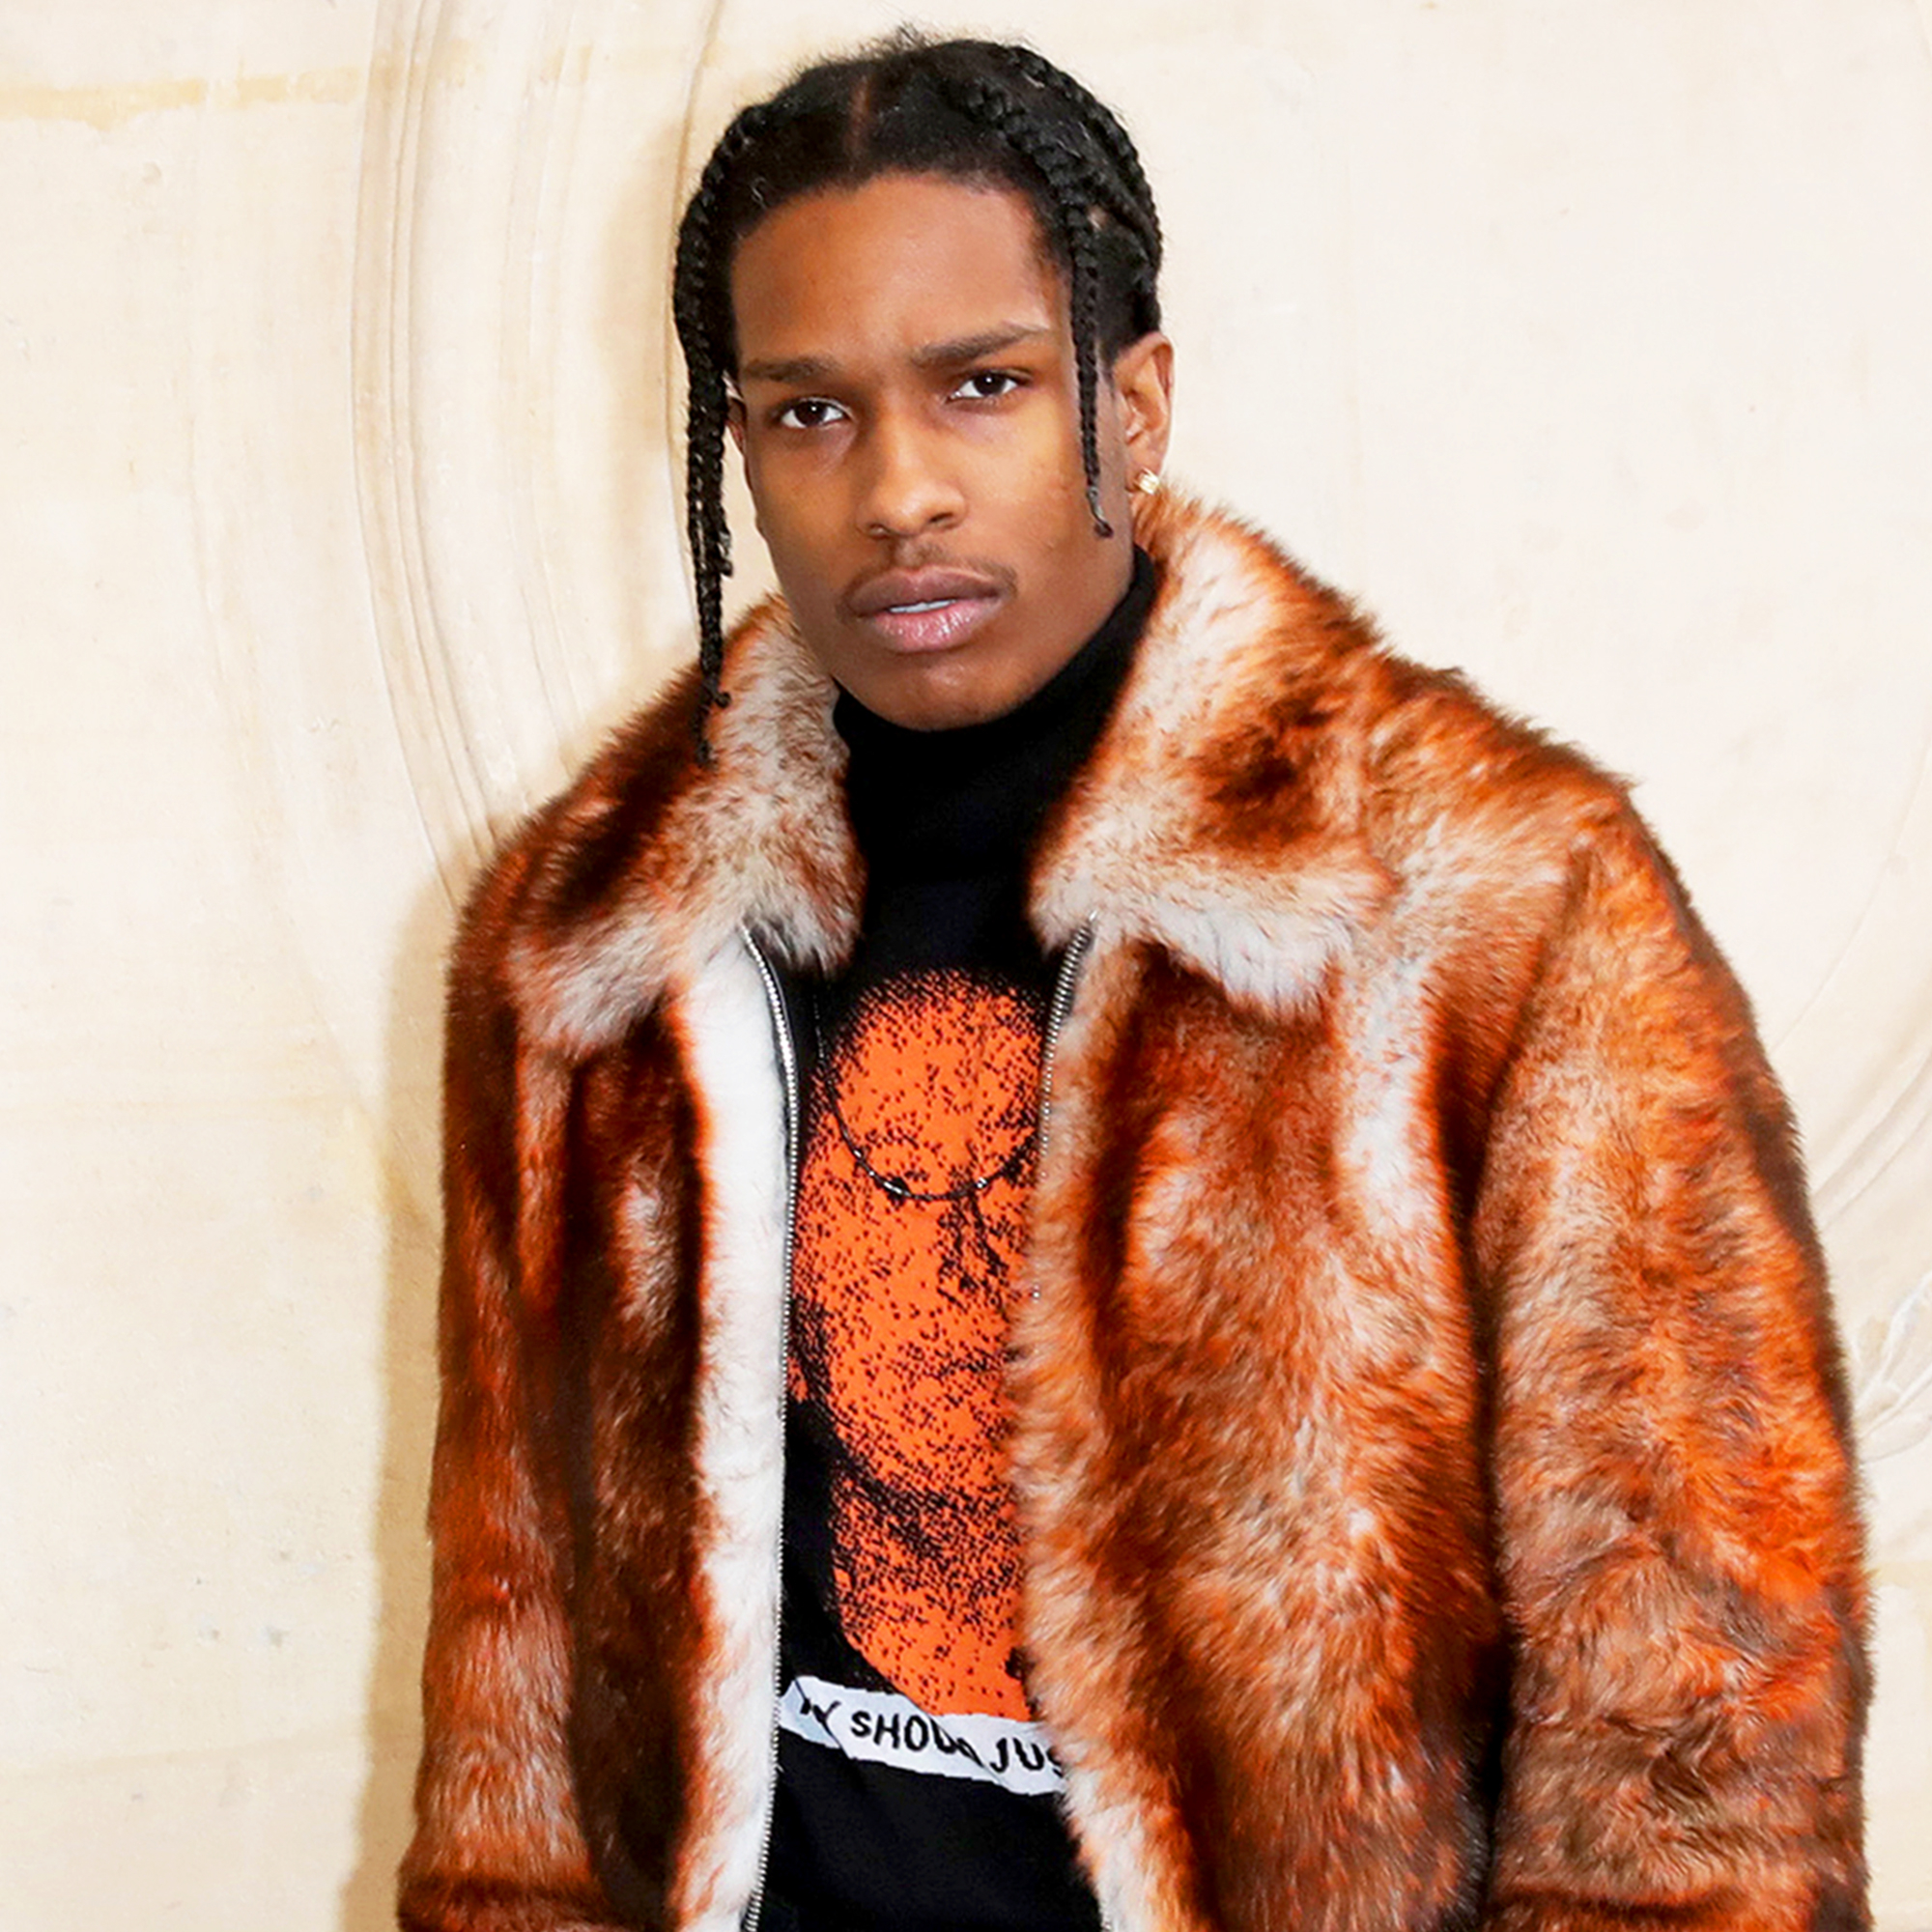 A$AP Rocky Robbed of $1.5 Million in Jewelry in Home Invasion